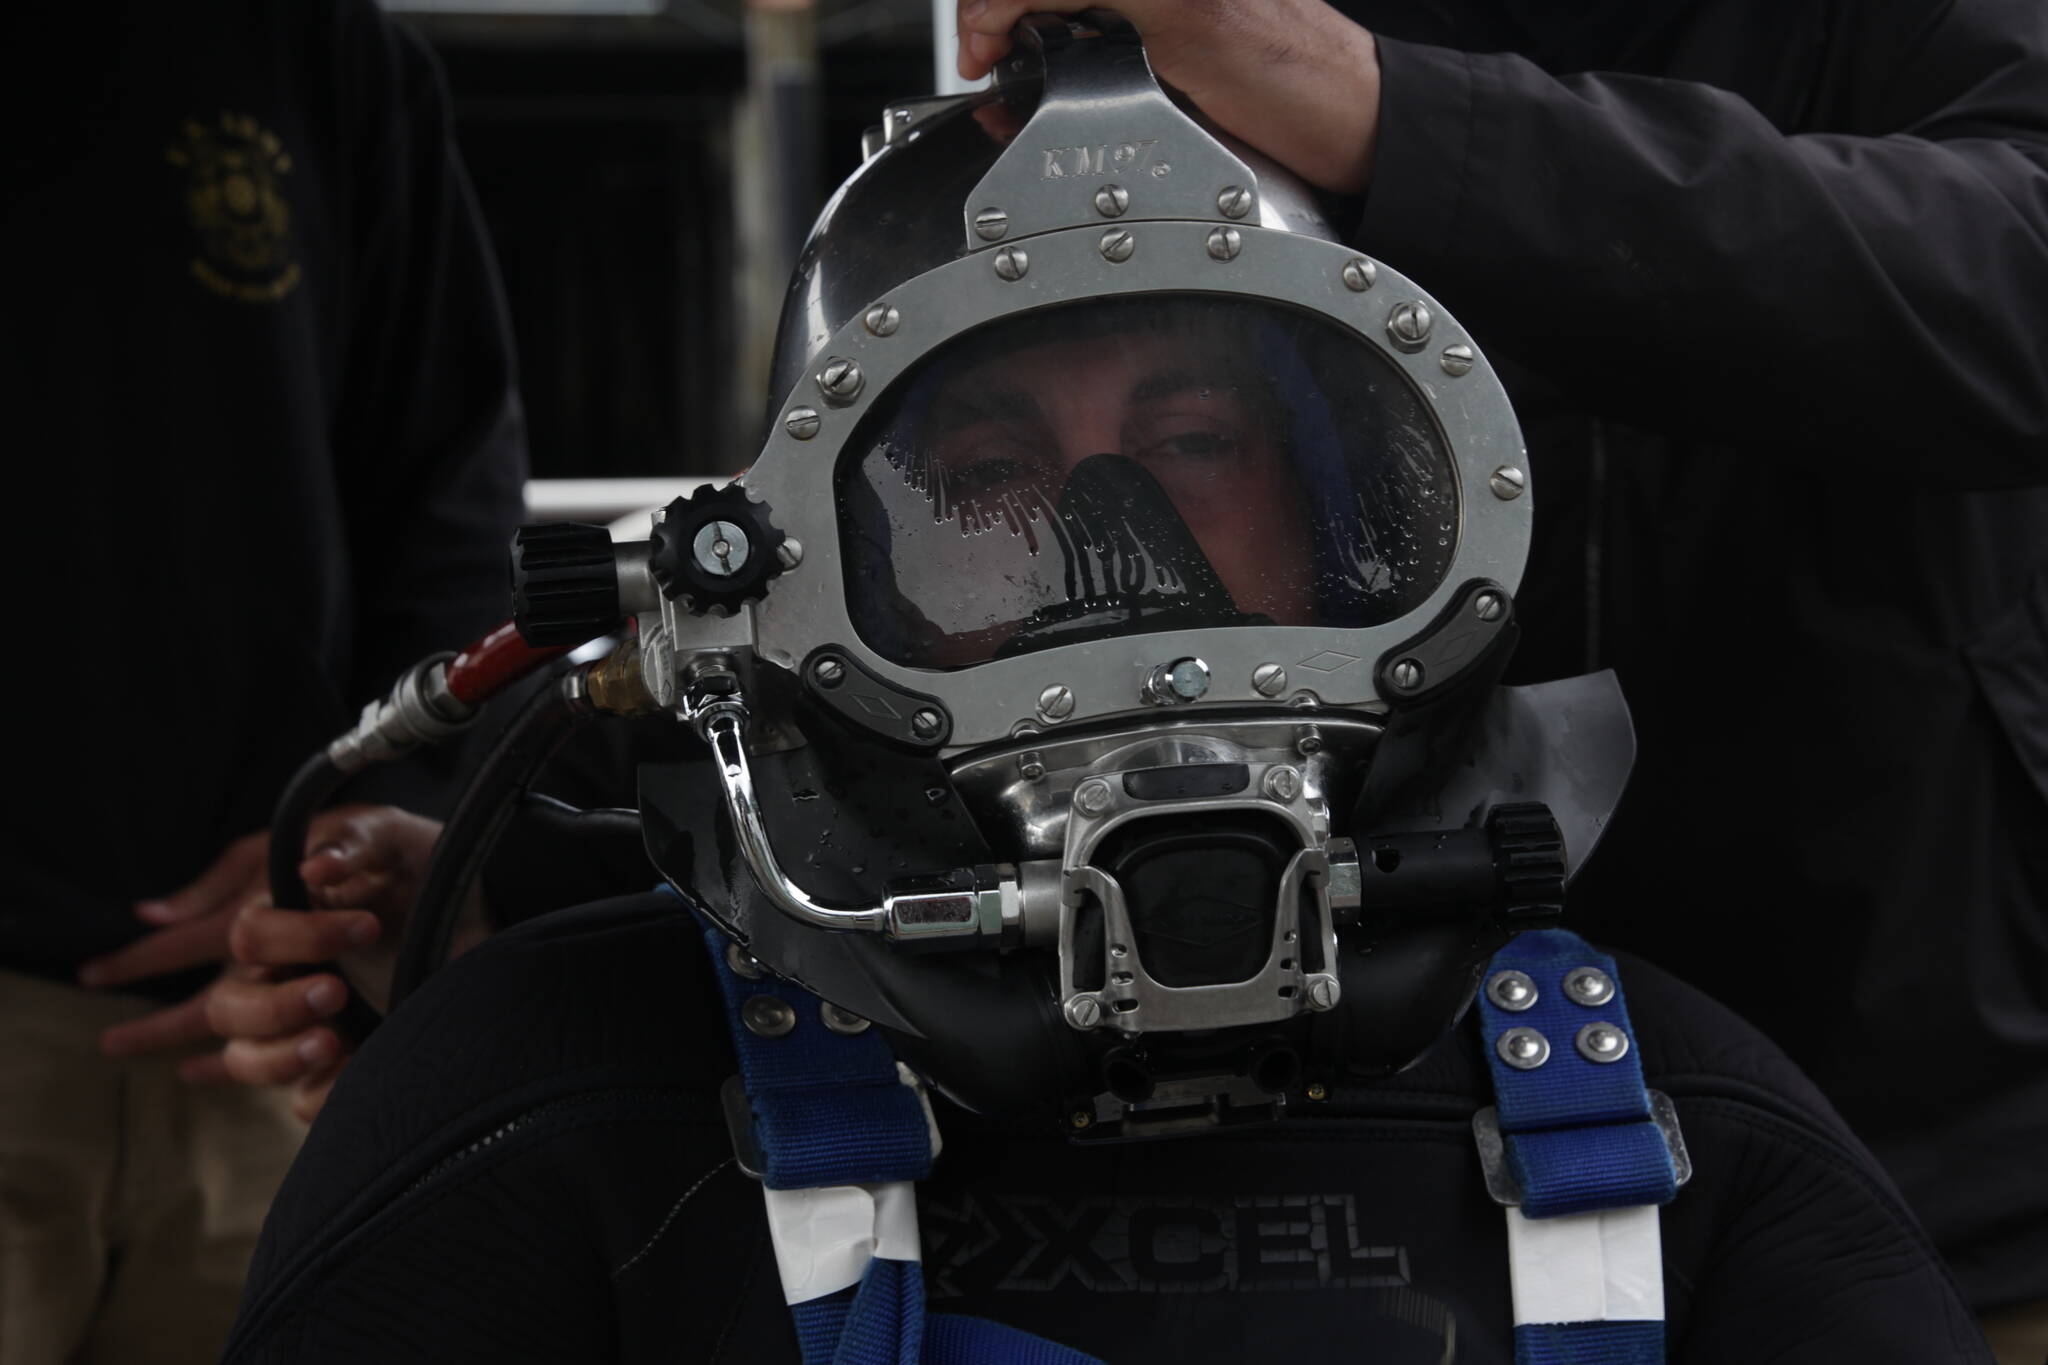 Army Pfc. Luke McCarty prepares to dive in downtown Juneau as part of training for the engineer divers with a Coast Guard dive team on Sept. 6, 2021. (Courtesy photo / MyKenzie Robertson)